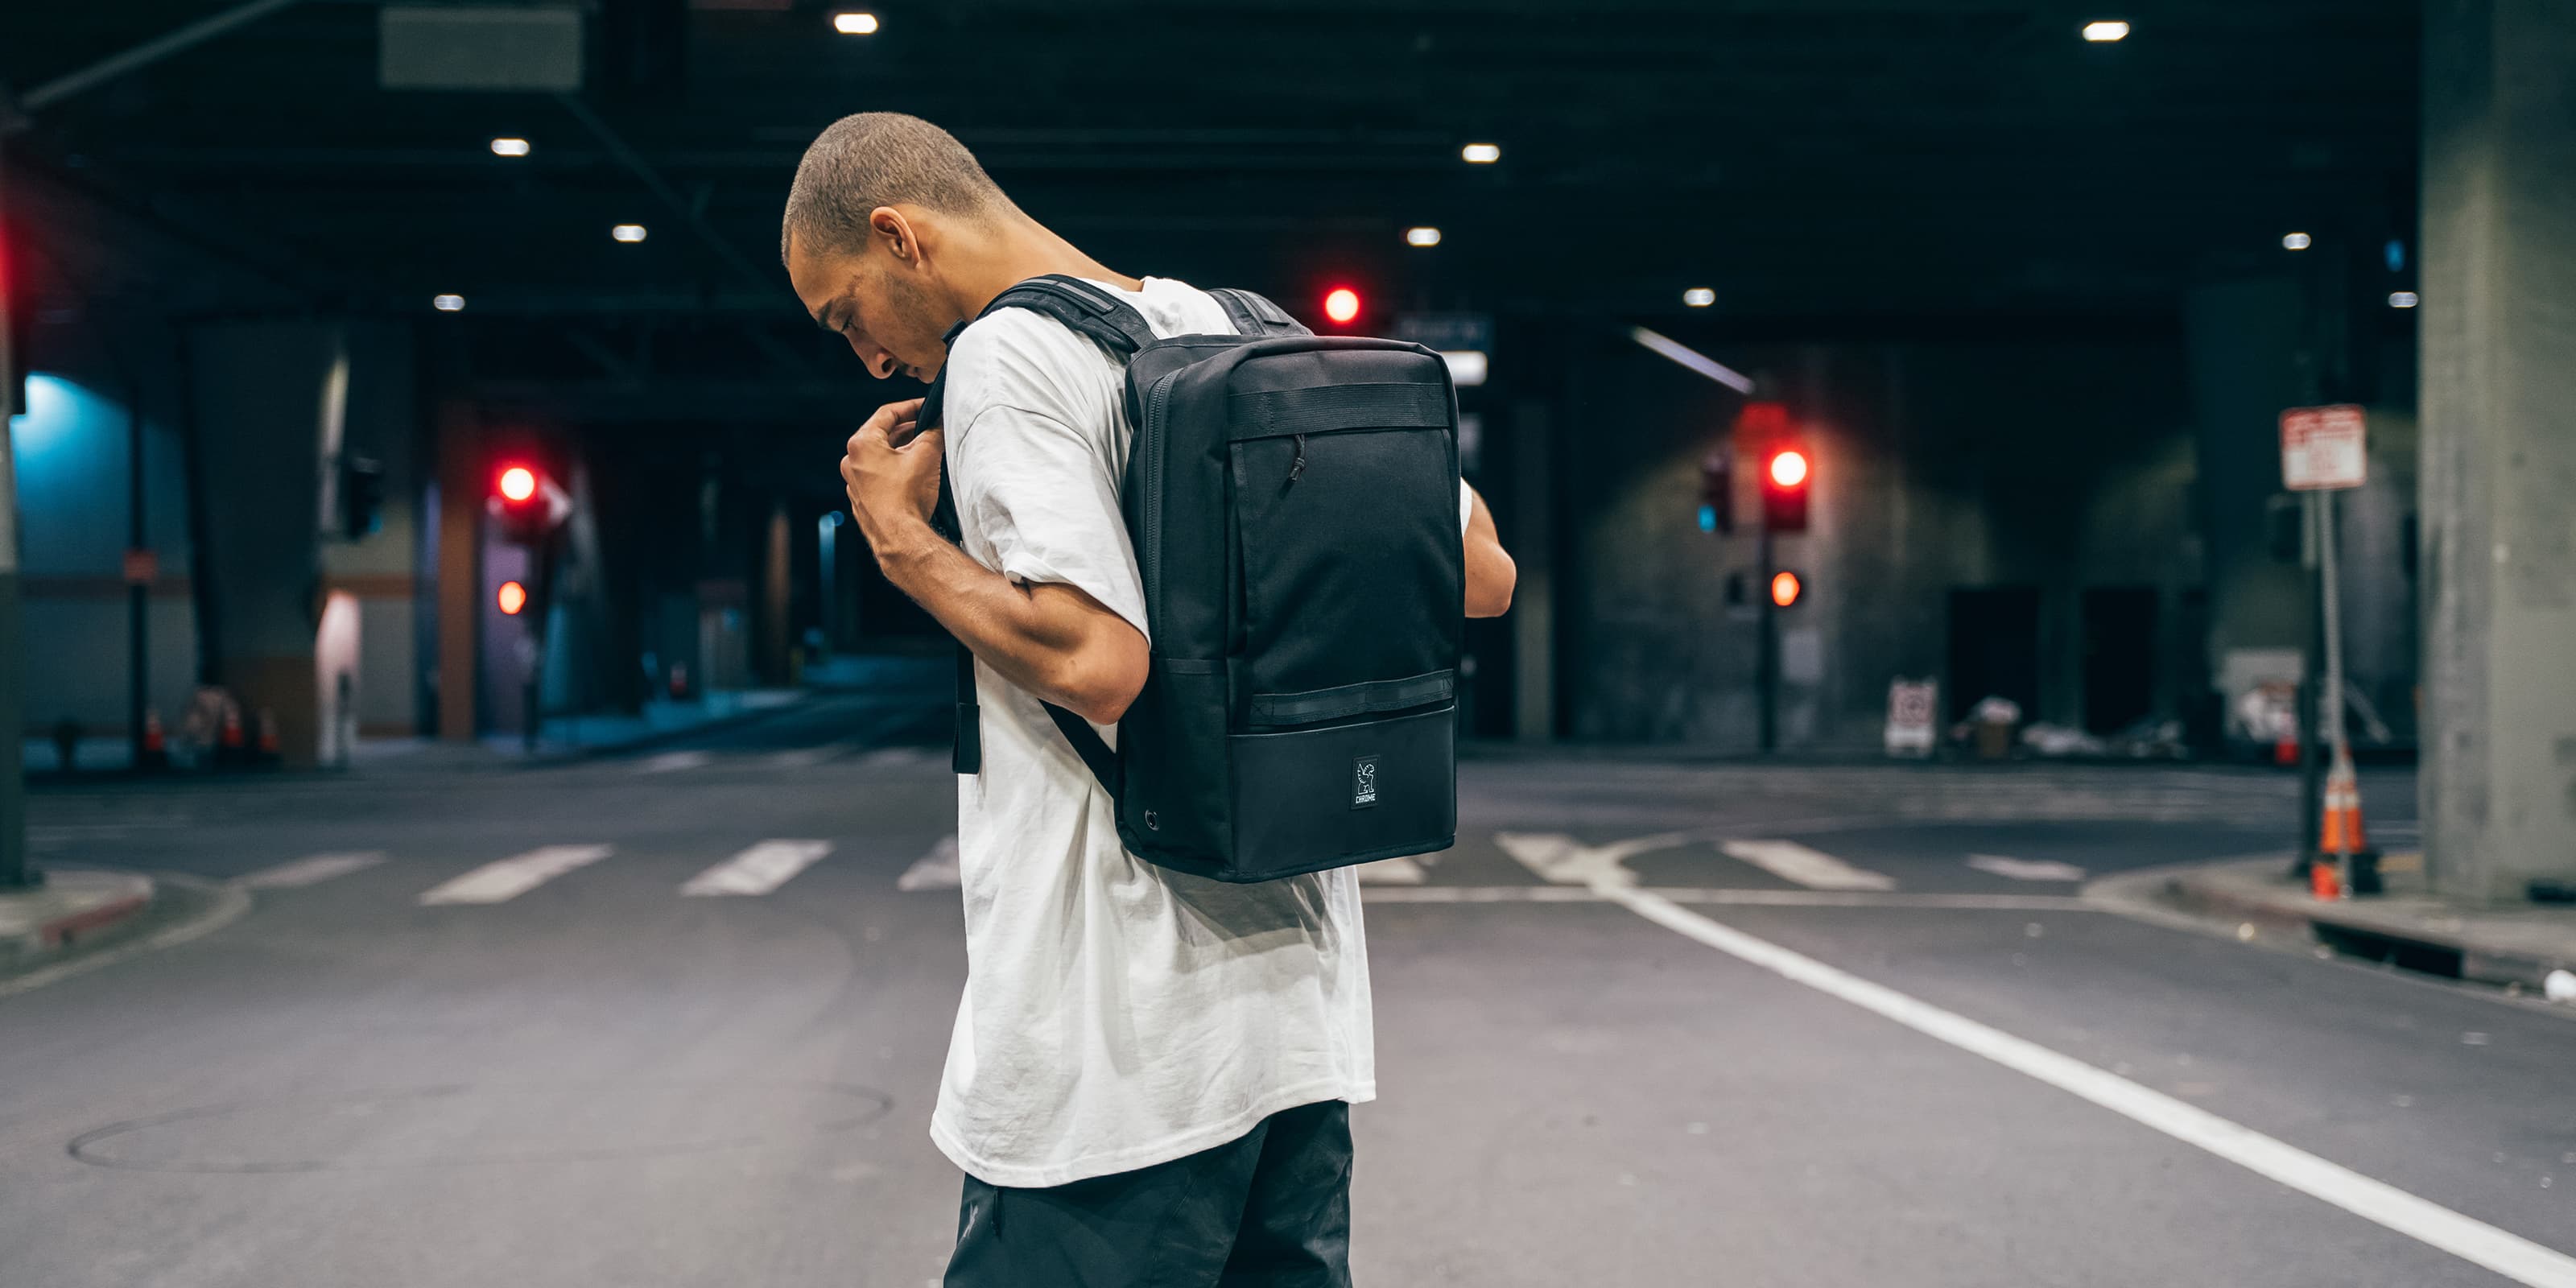 Street view of the Hondo Backpack being worn by a person